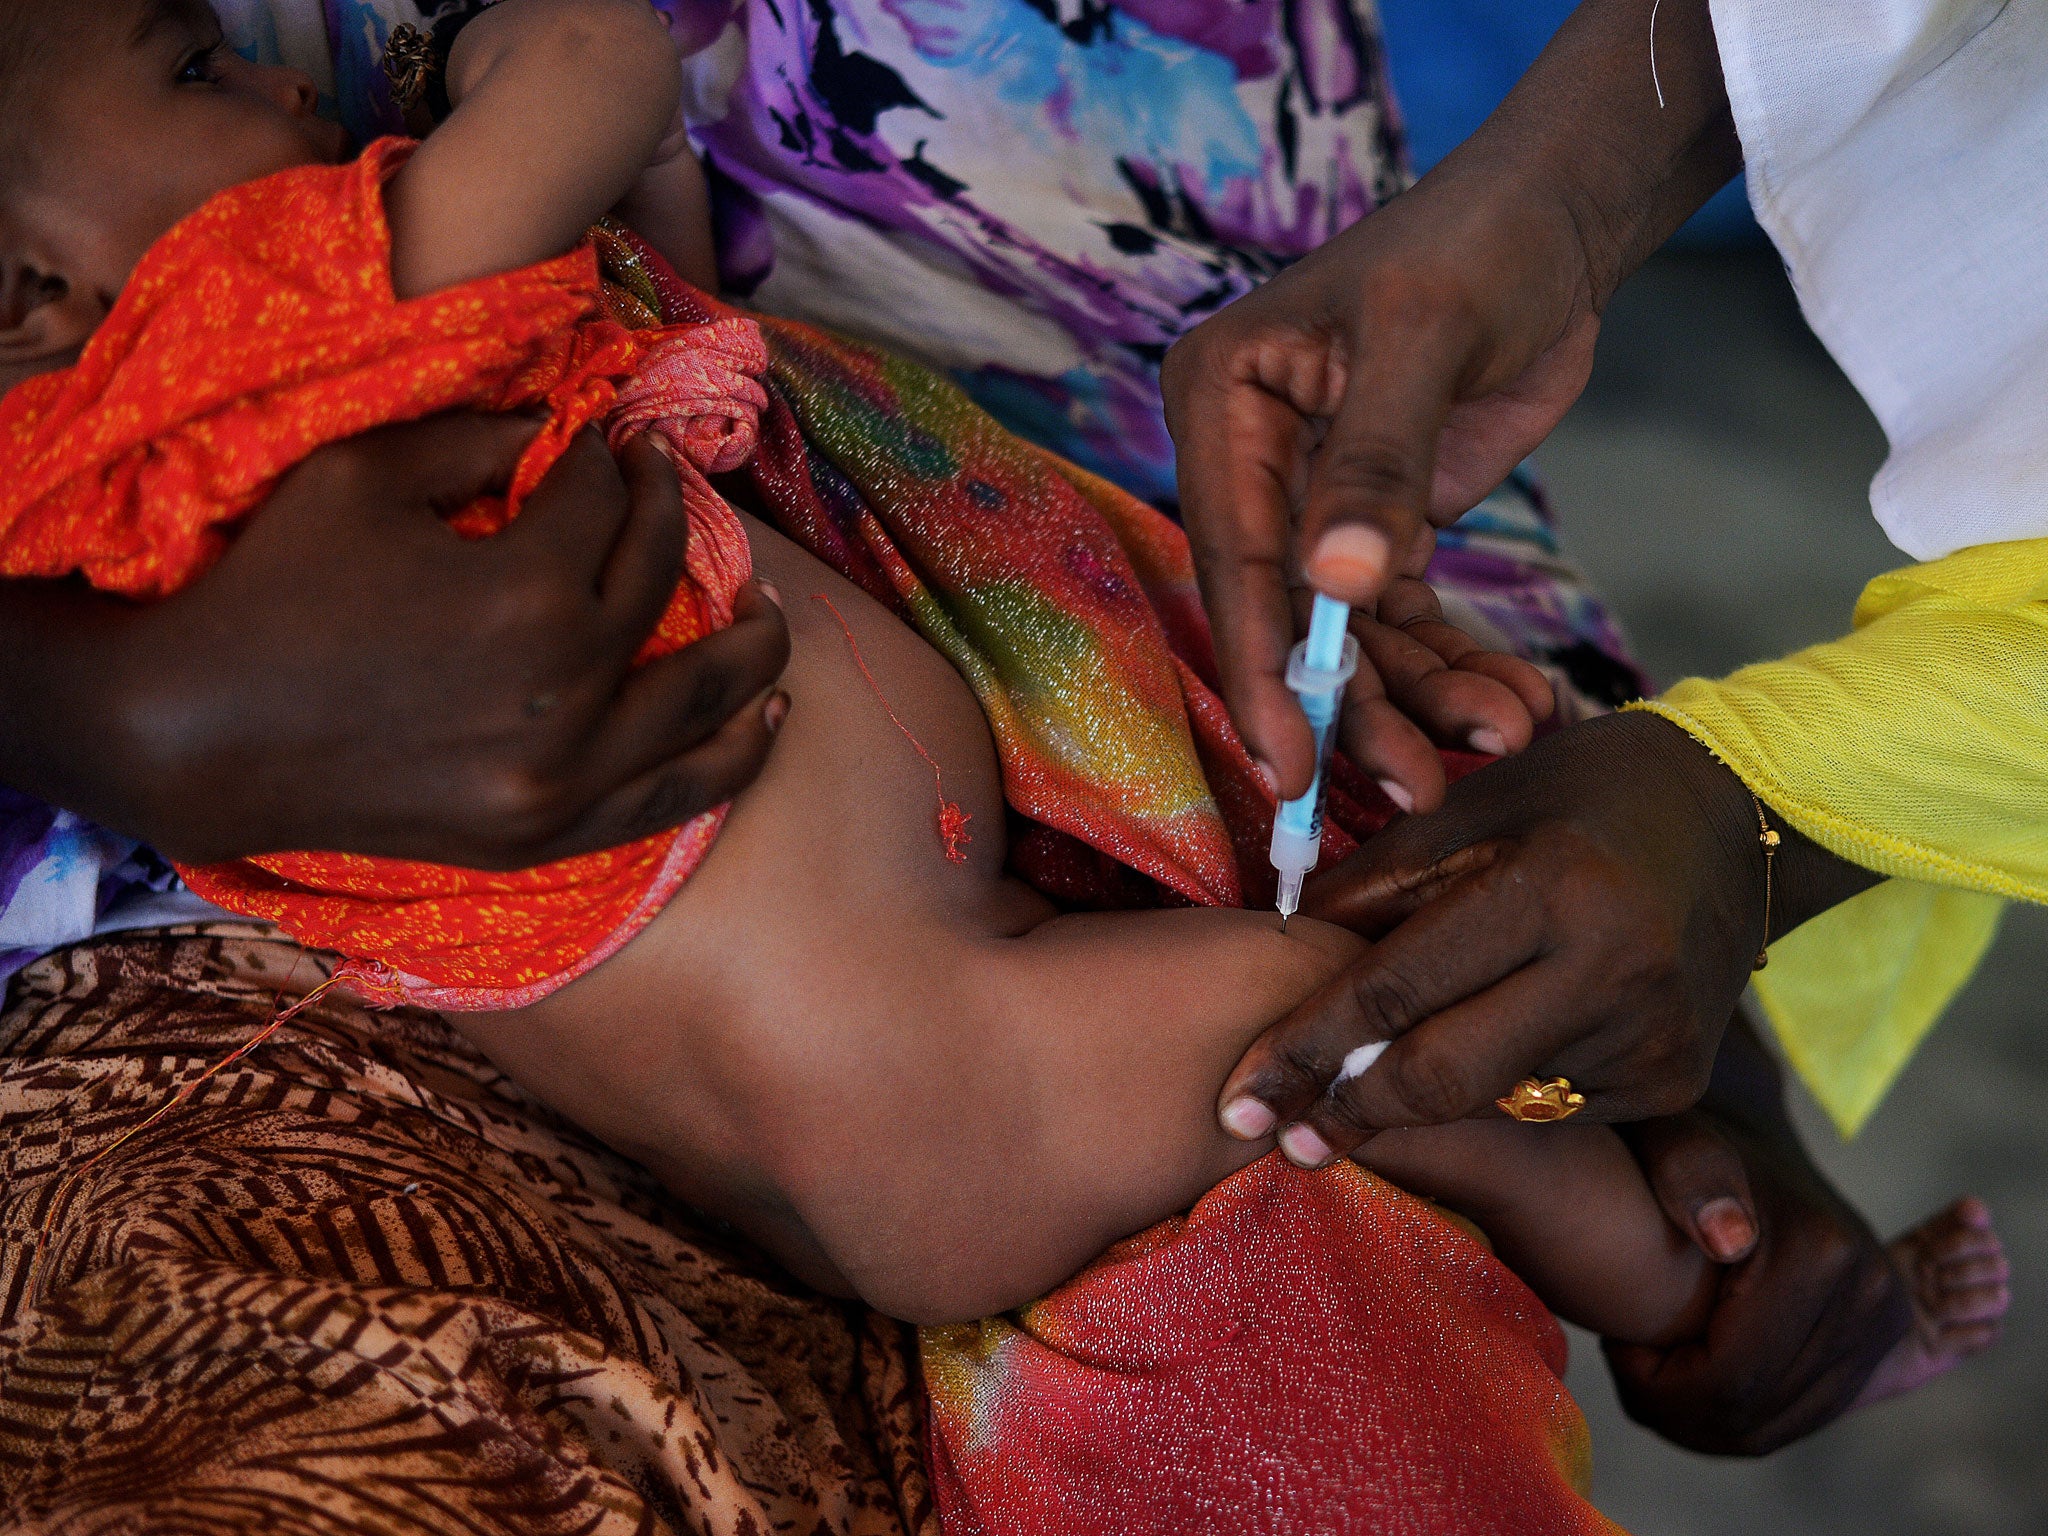 A Somali baby is given a pentavalent vaccine injection at a medical clinic in Mogadishu. The vaccine, which includes protection against meningitis, diphtheria, tetanus, whooping cough and hepatitis B, is being given to all children under a year old in Somalia